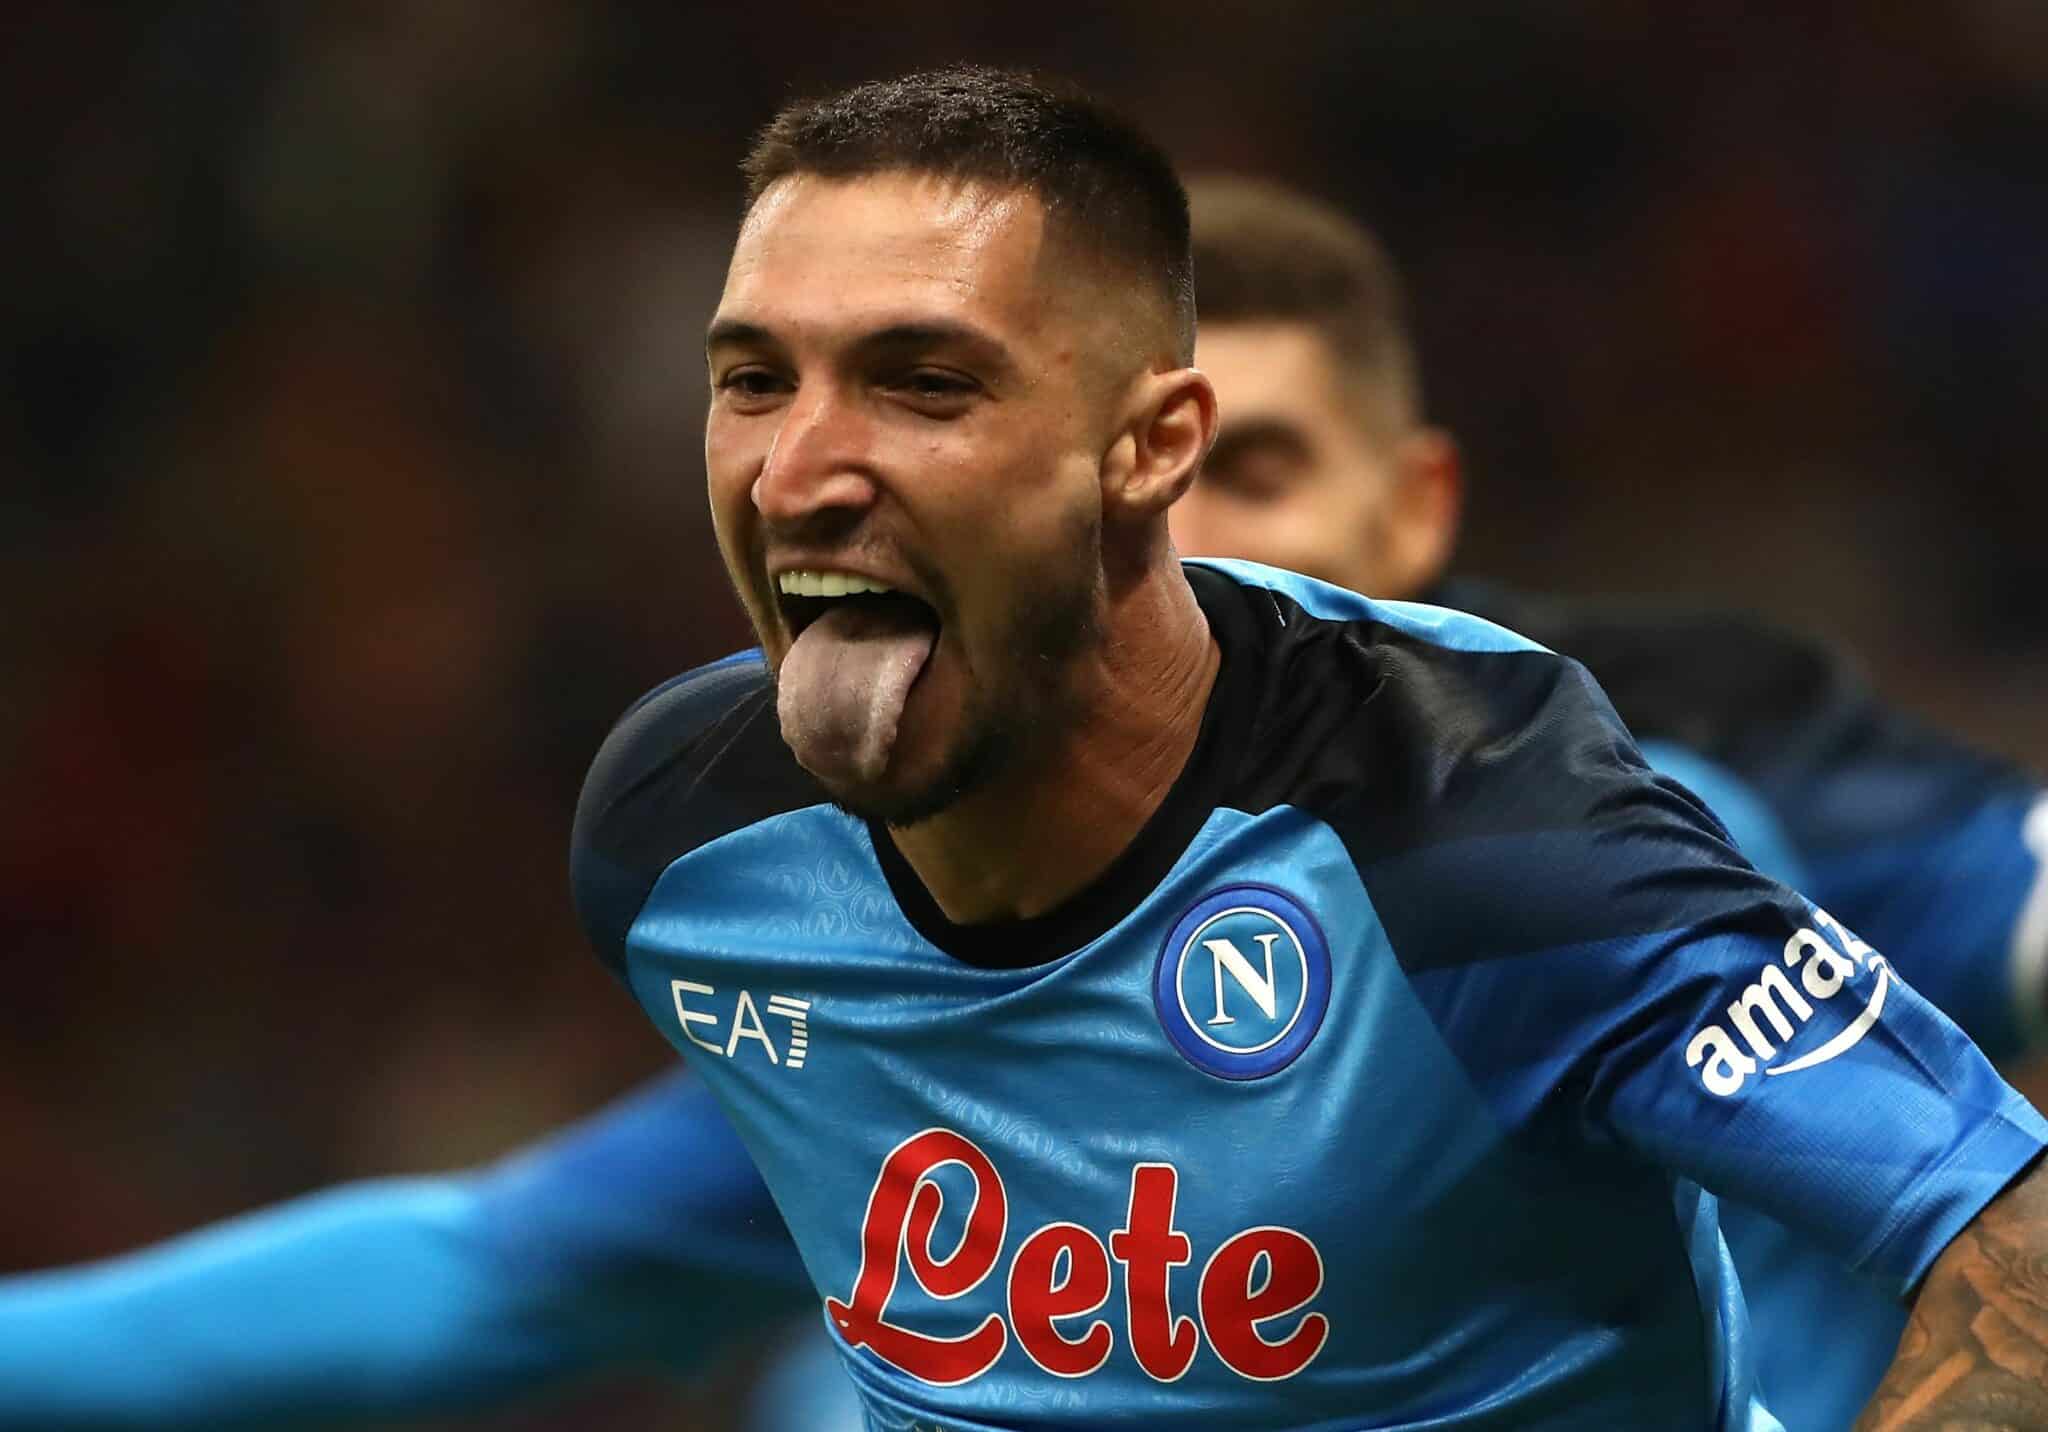 Napoli ended a secondary transfer saga right after deadline day in Saudi Arabia, as Matteo Politano has officially prolonged his contract until 2027.